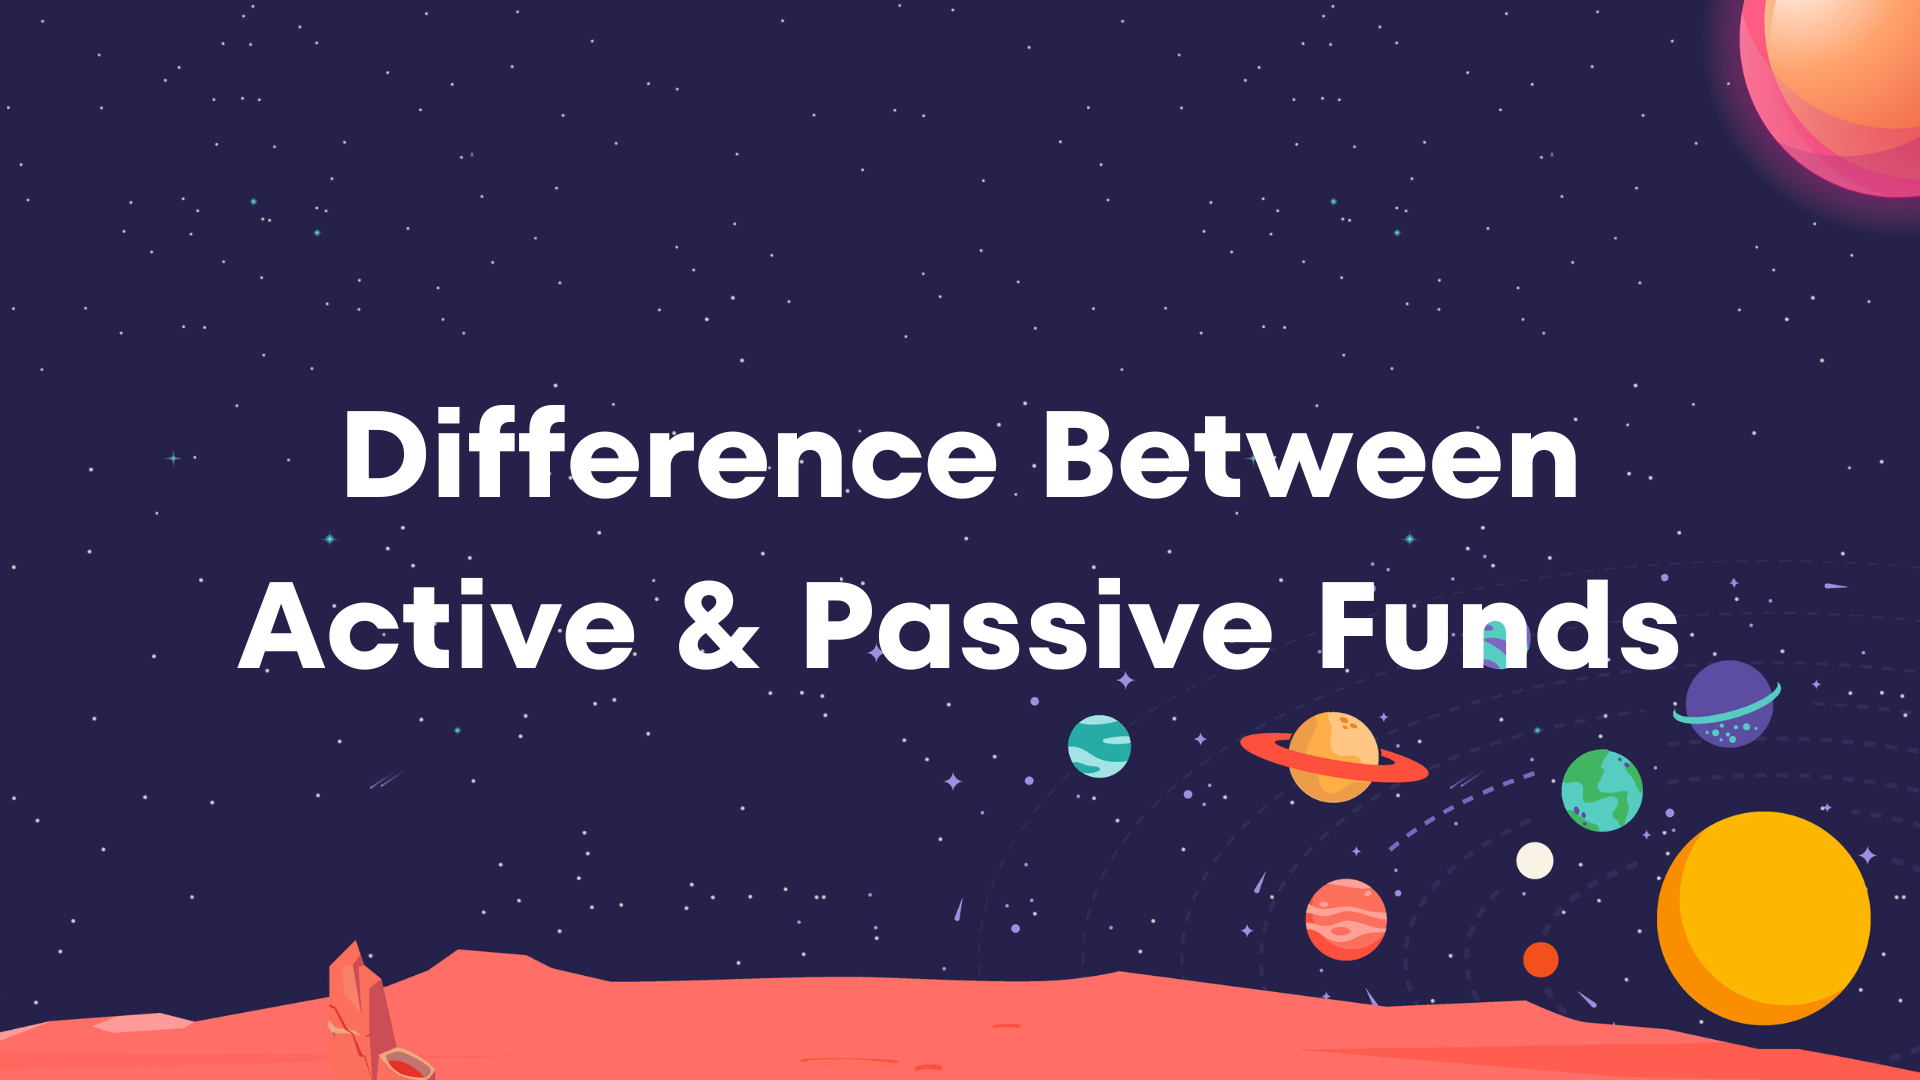 Difference Between Passive and Active Funds - Easy Comparison